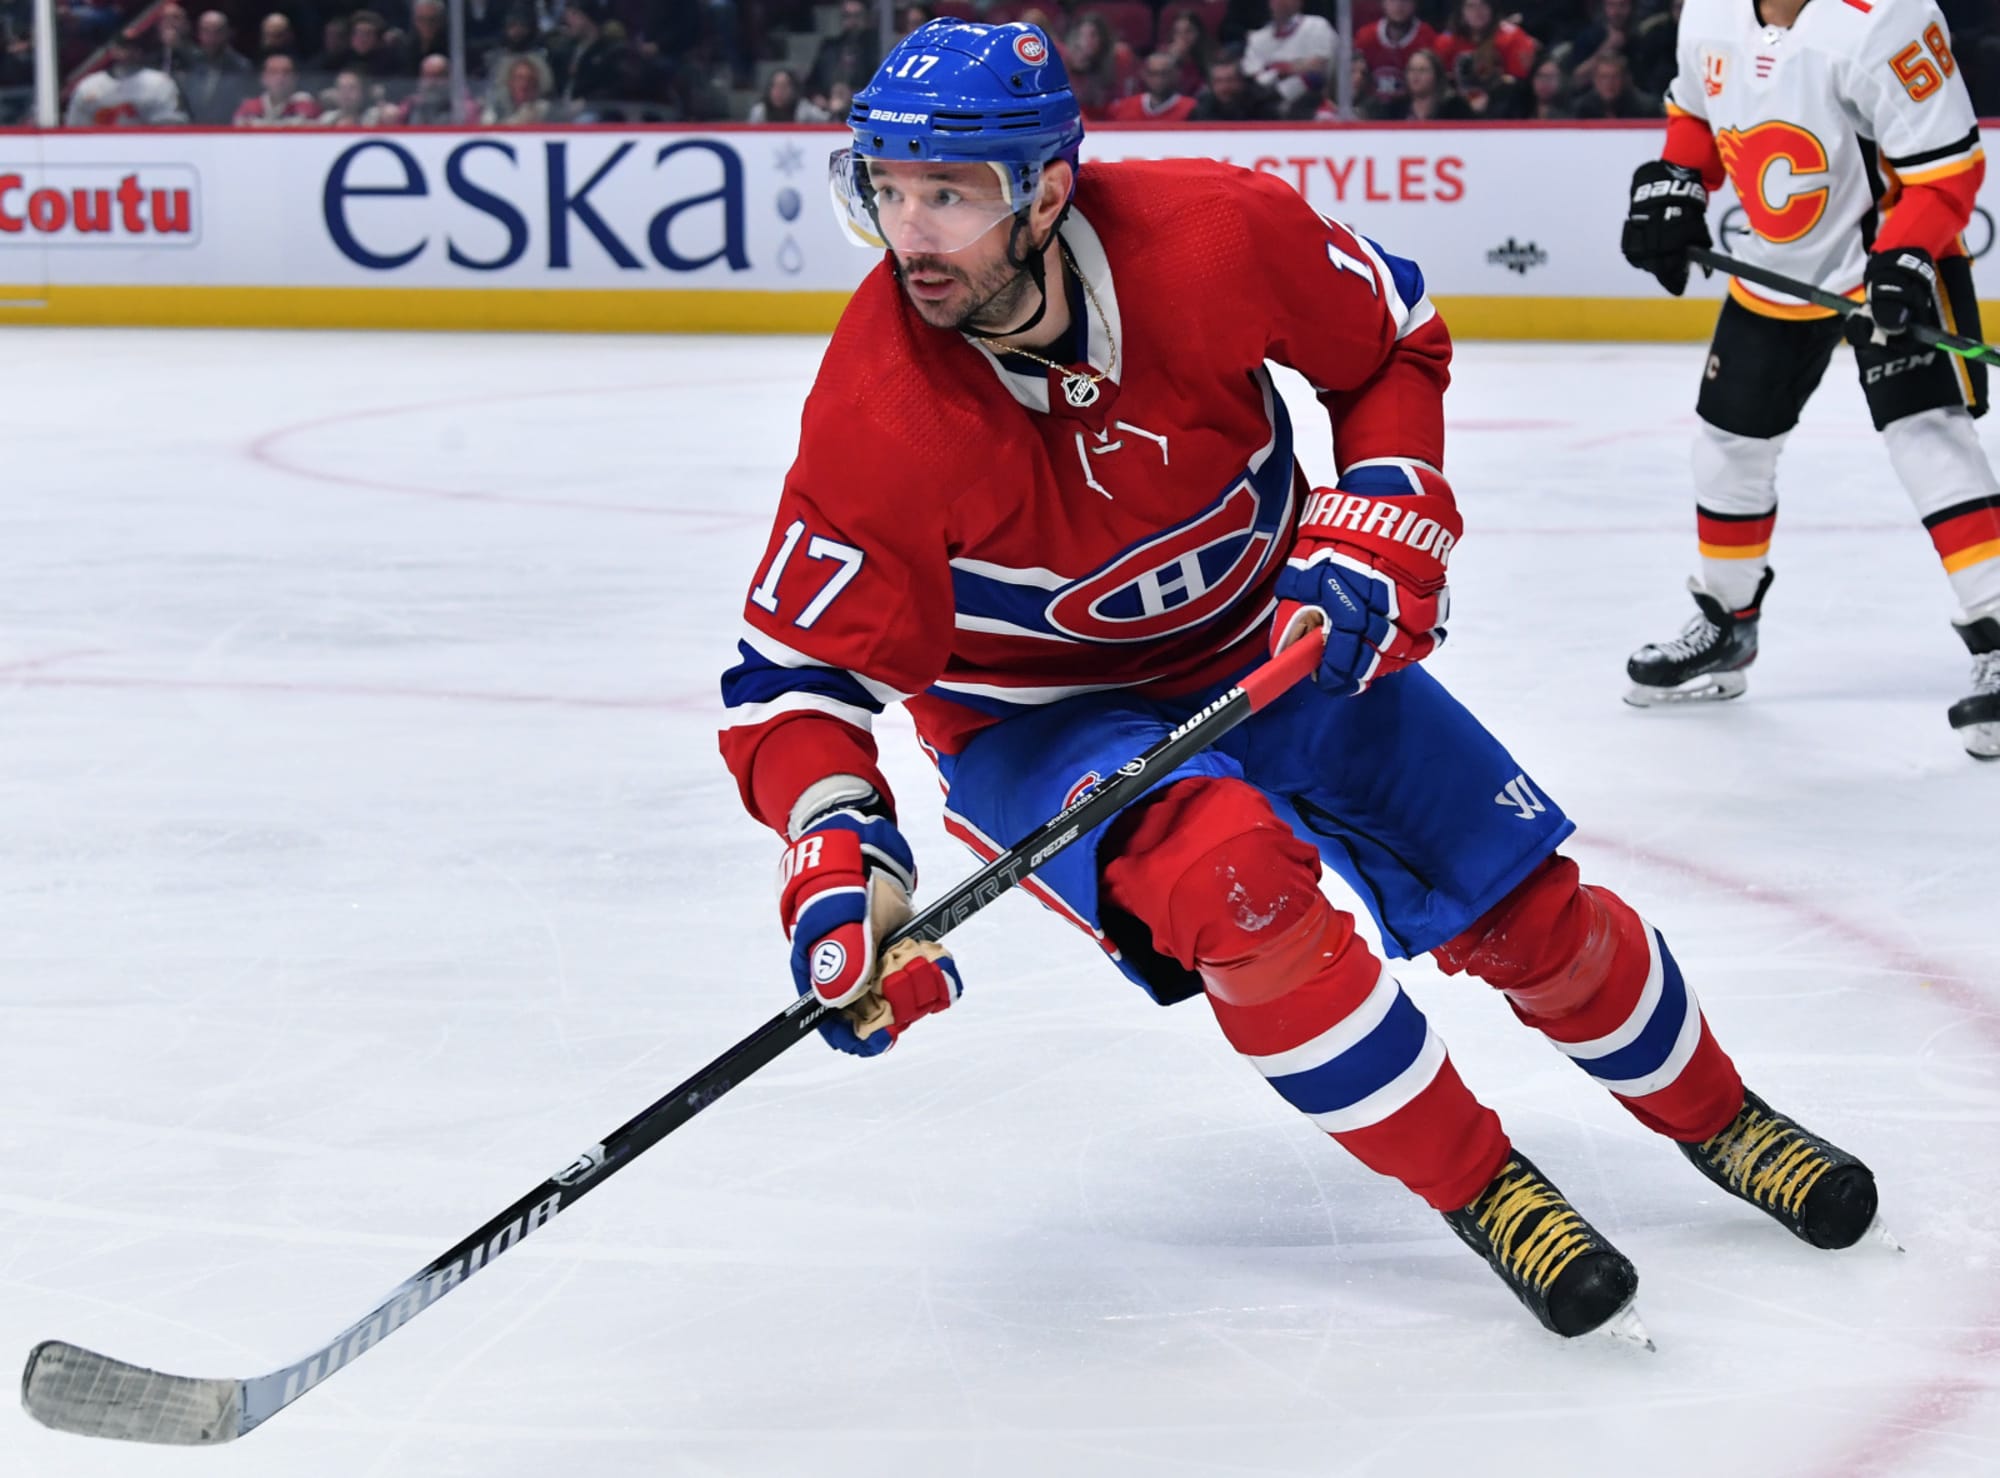 Canadiens Canadiens Bruins Start time, Tale of the Tape, and how